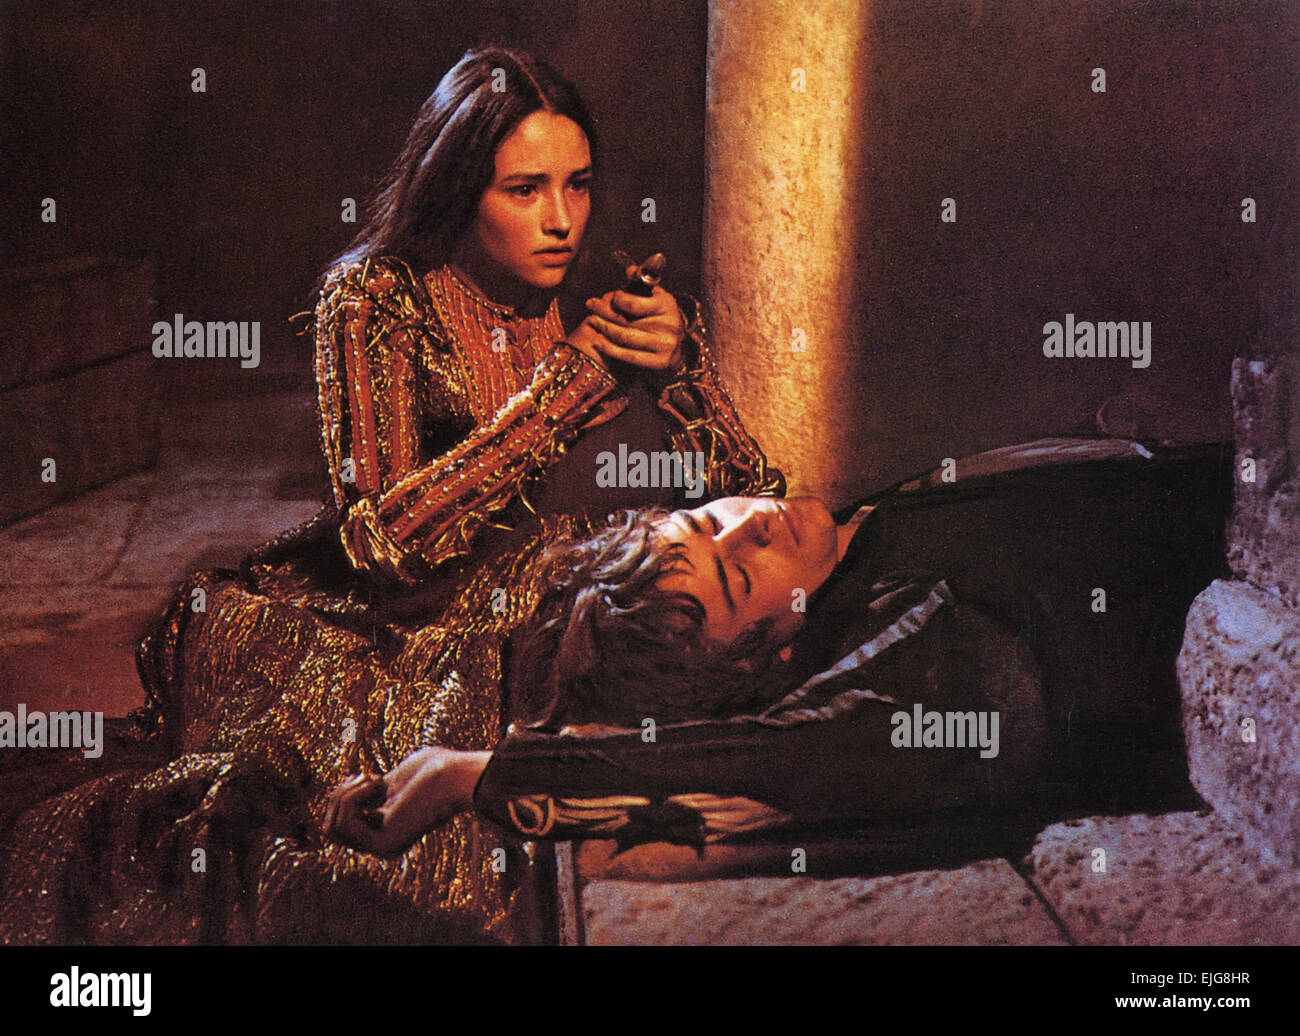 Romeo and juliet 1968 download